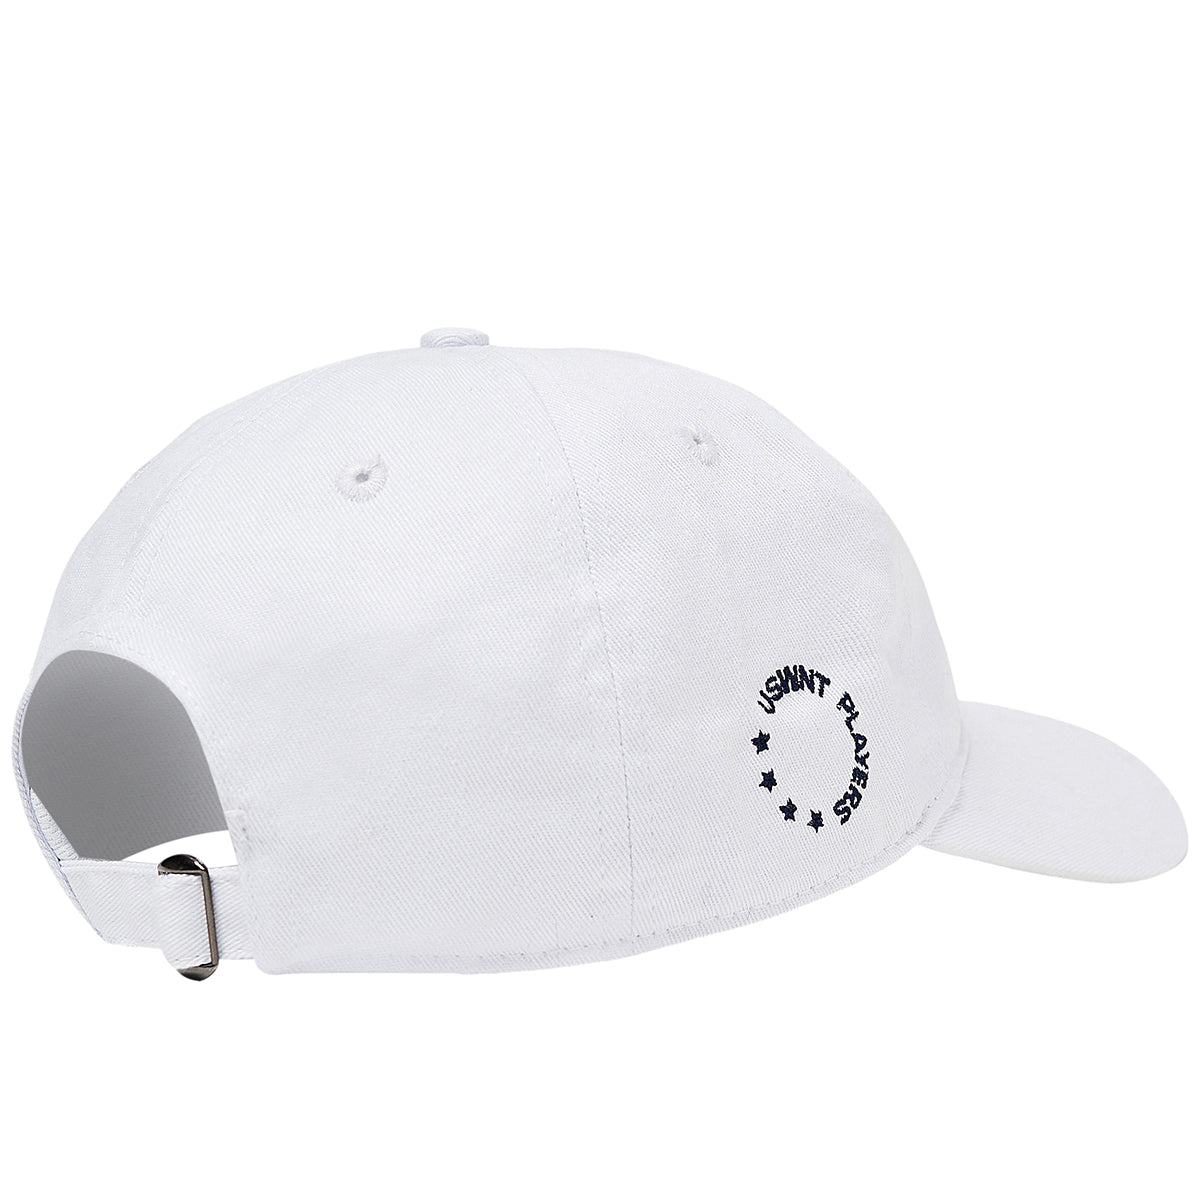 Official USWNT Players Association Hat